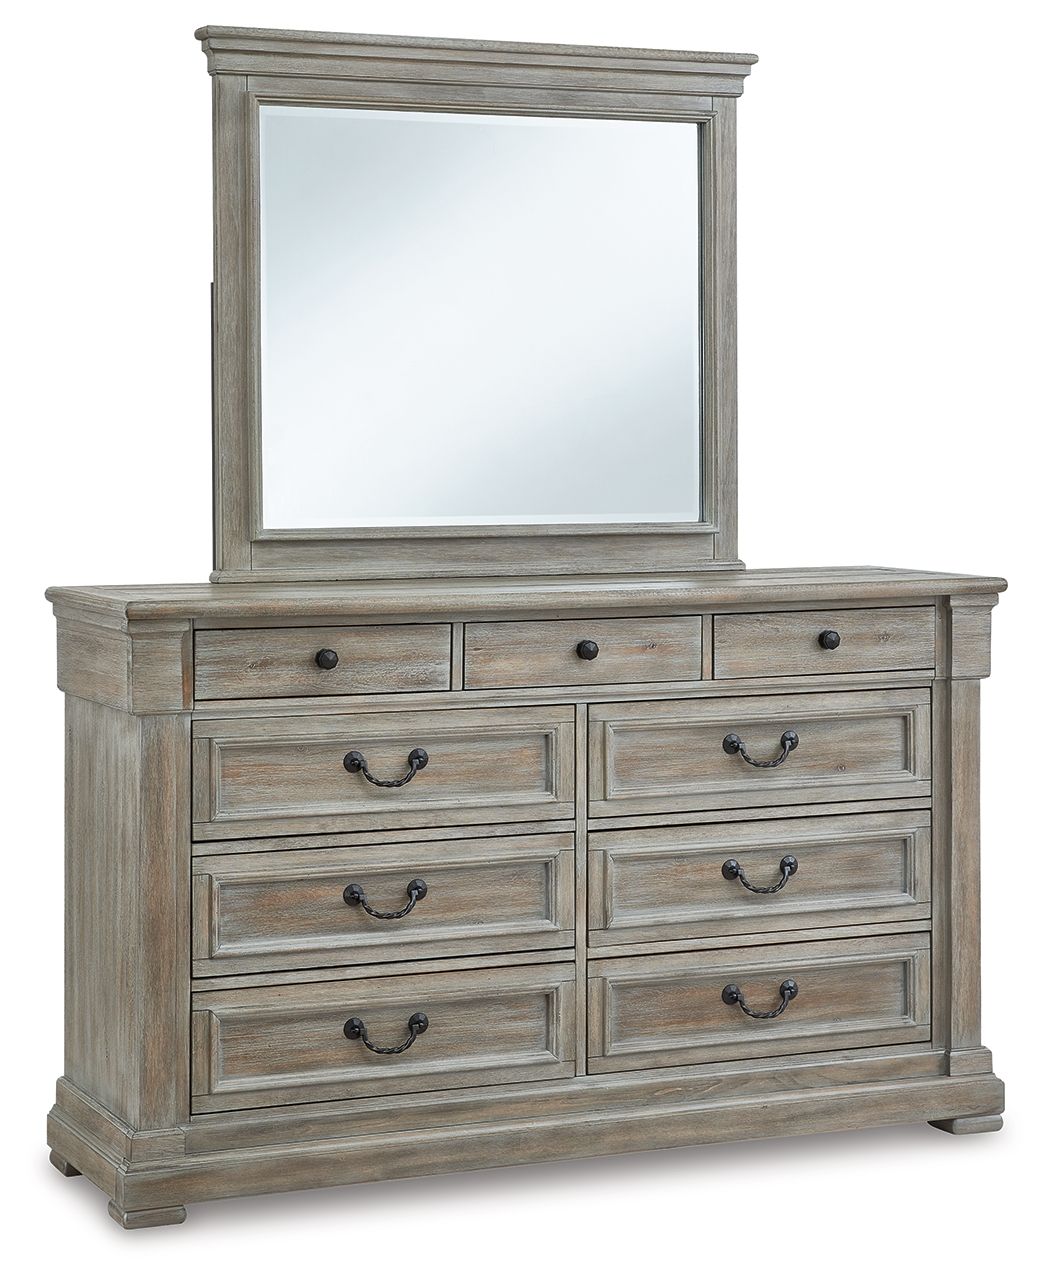 Moreshire - Bisque - Dresser, Mirror - Tony's Home Furnishings